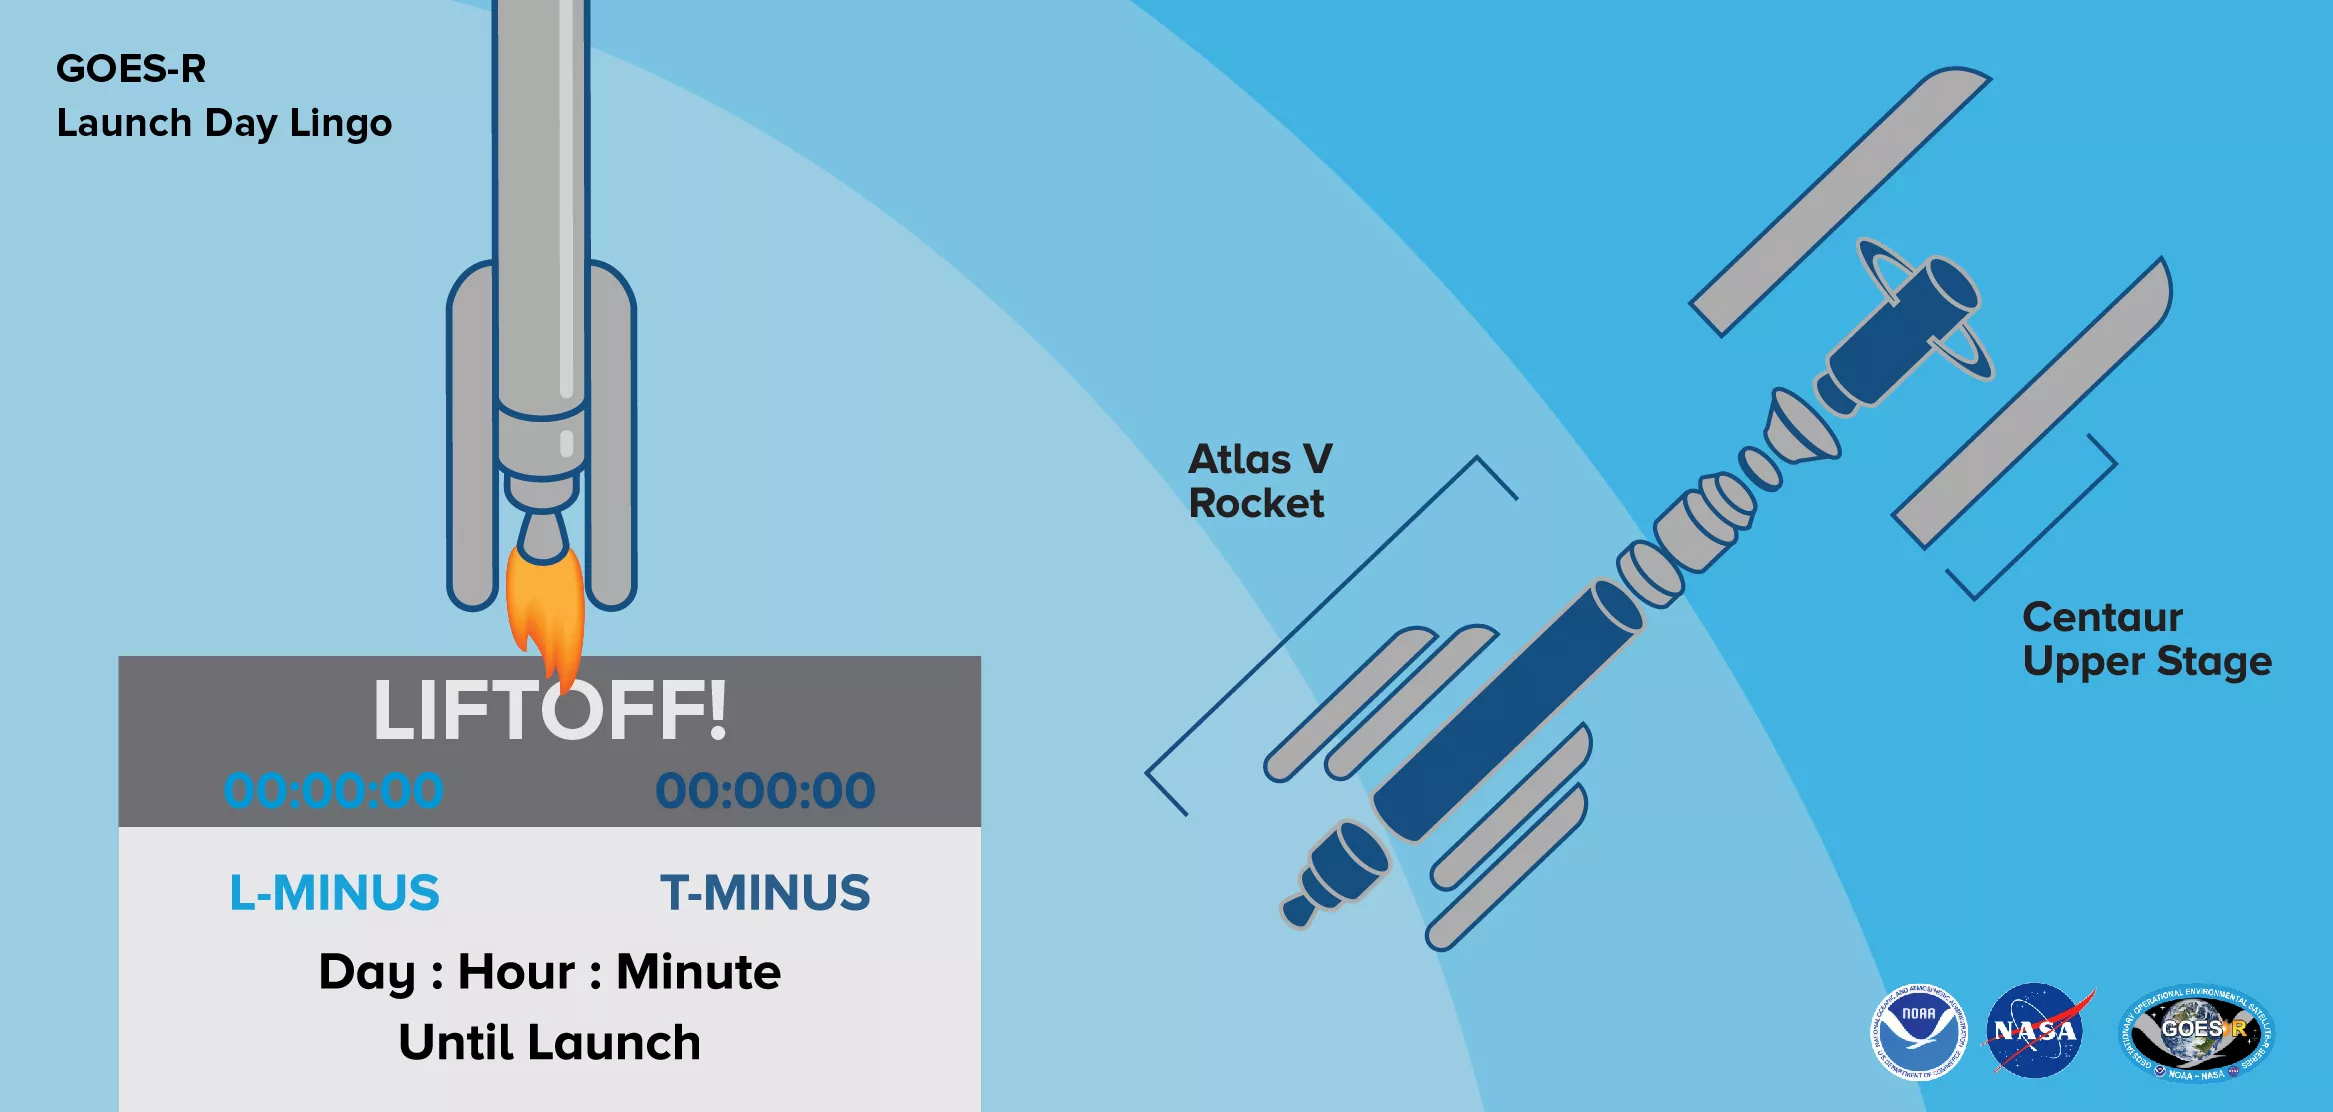 Rendering of the launch of the Atlas V rocket